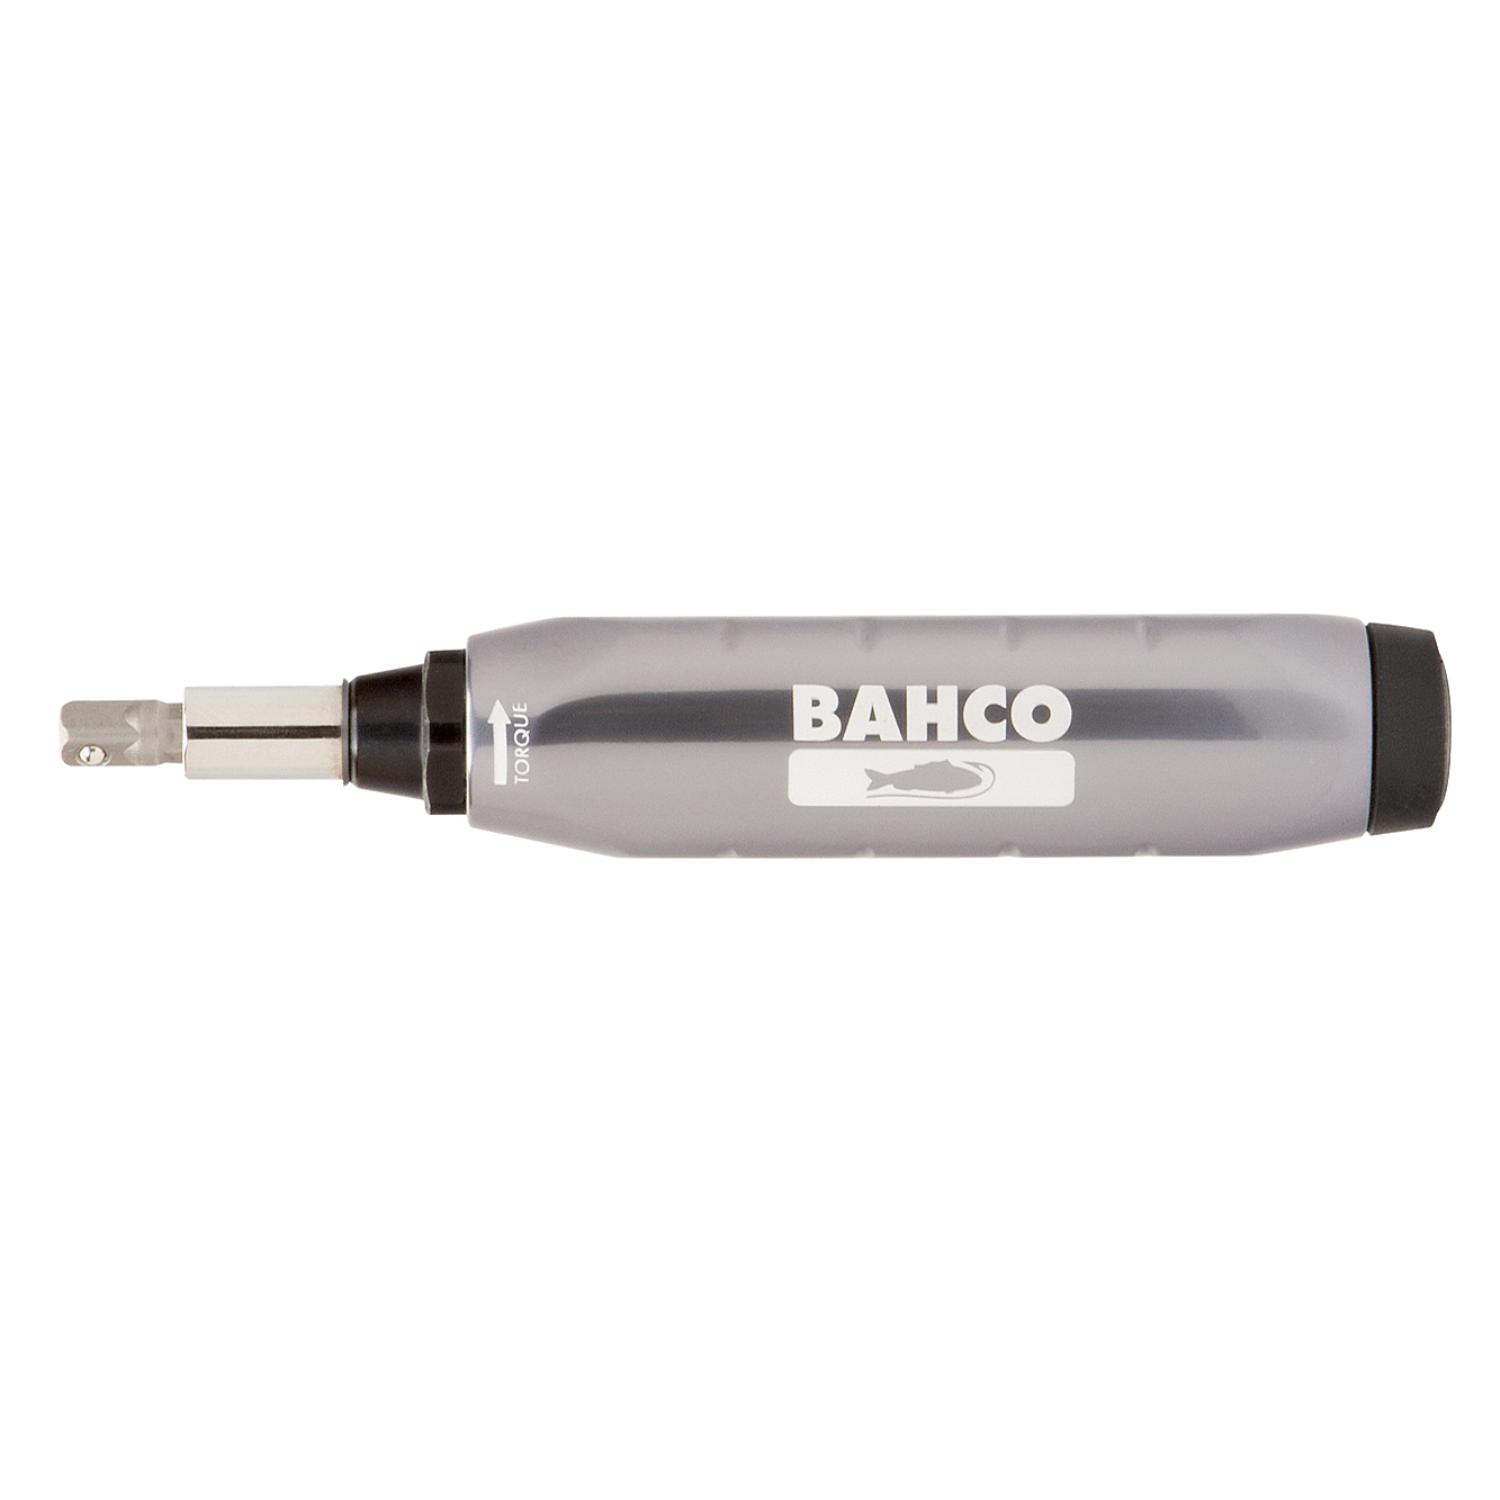 BAHCO 6873N-6880N Preset Torque Screwdriver with Window Scale - Premium Preset Torque from BAHCO - Shop now at Yew Aik.